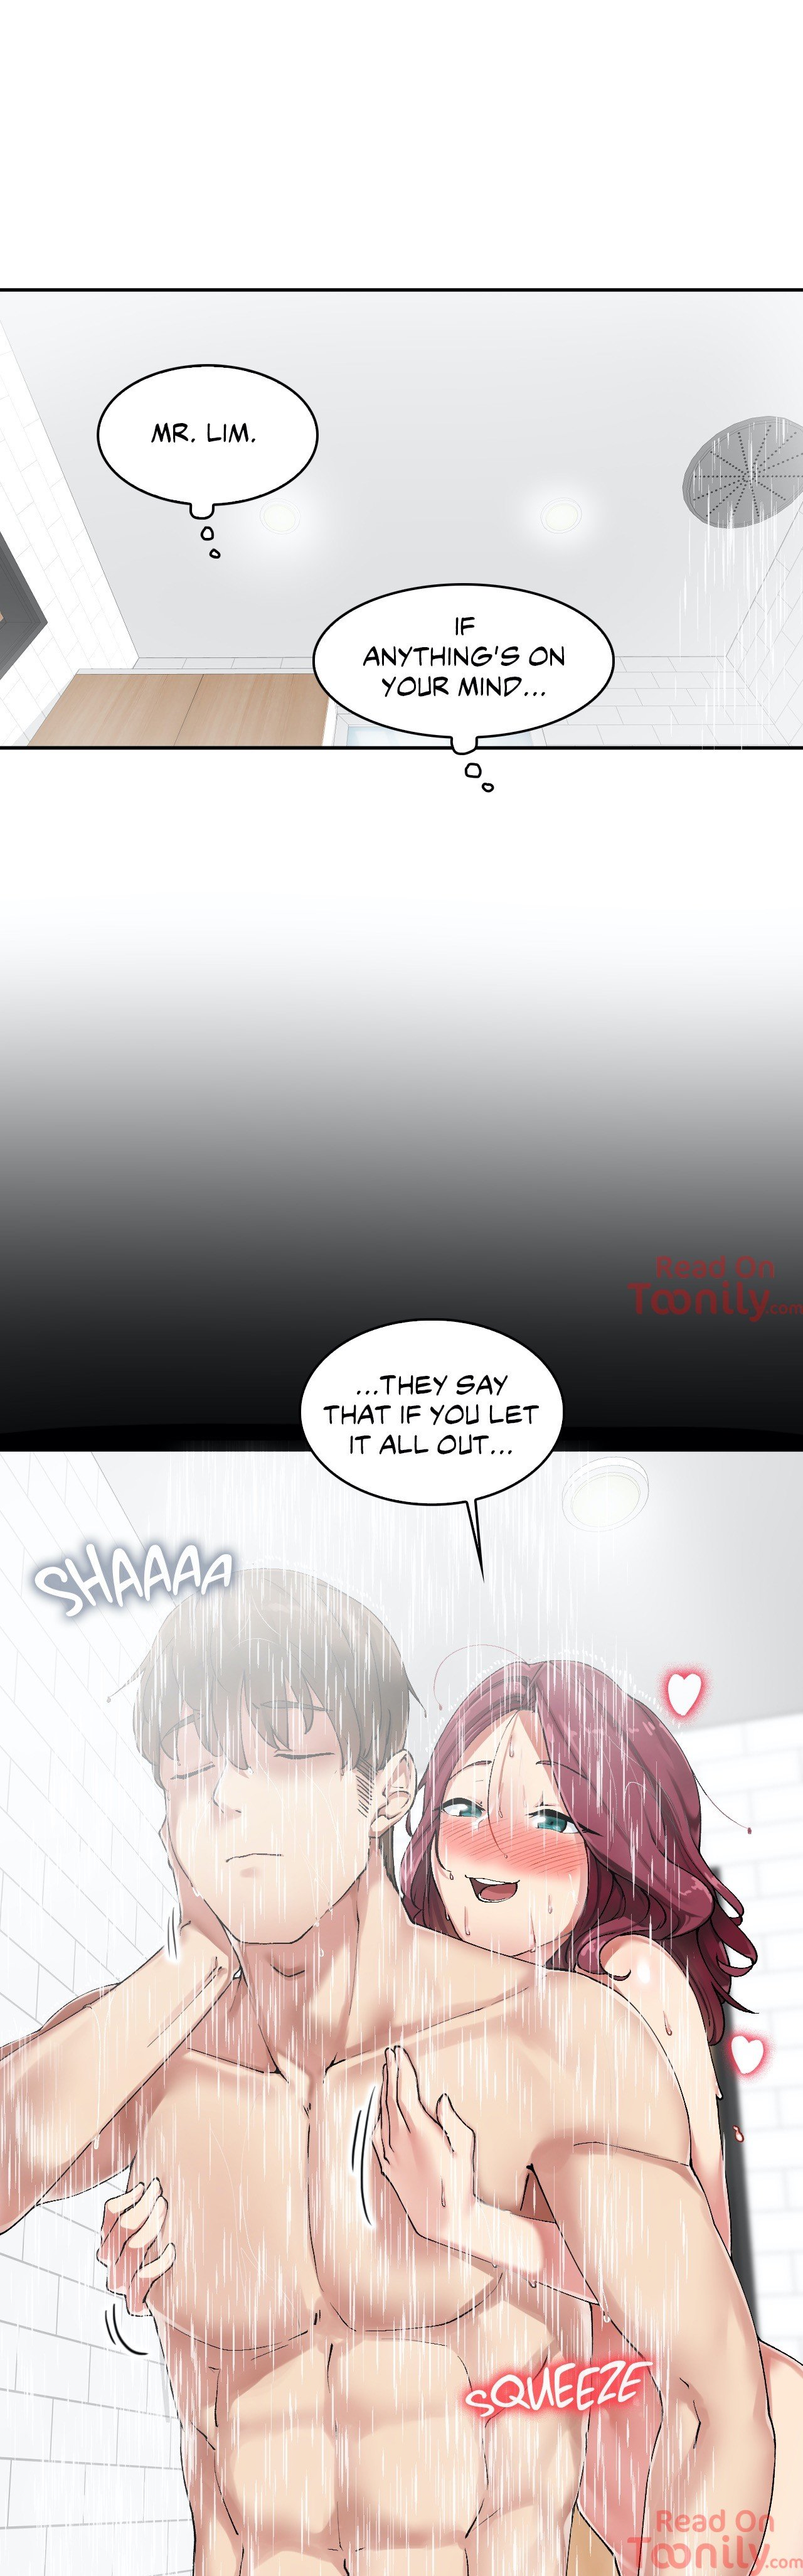 The Girl Hiding in the Wall - Chapter 6 Page 7